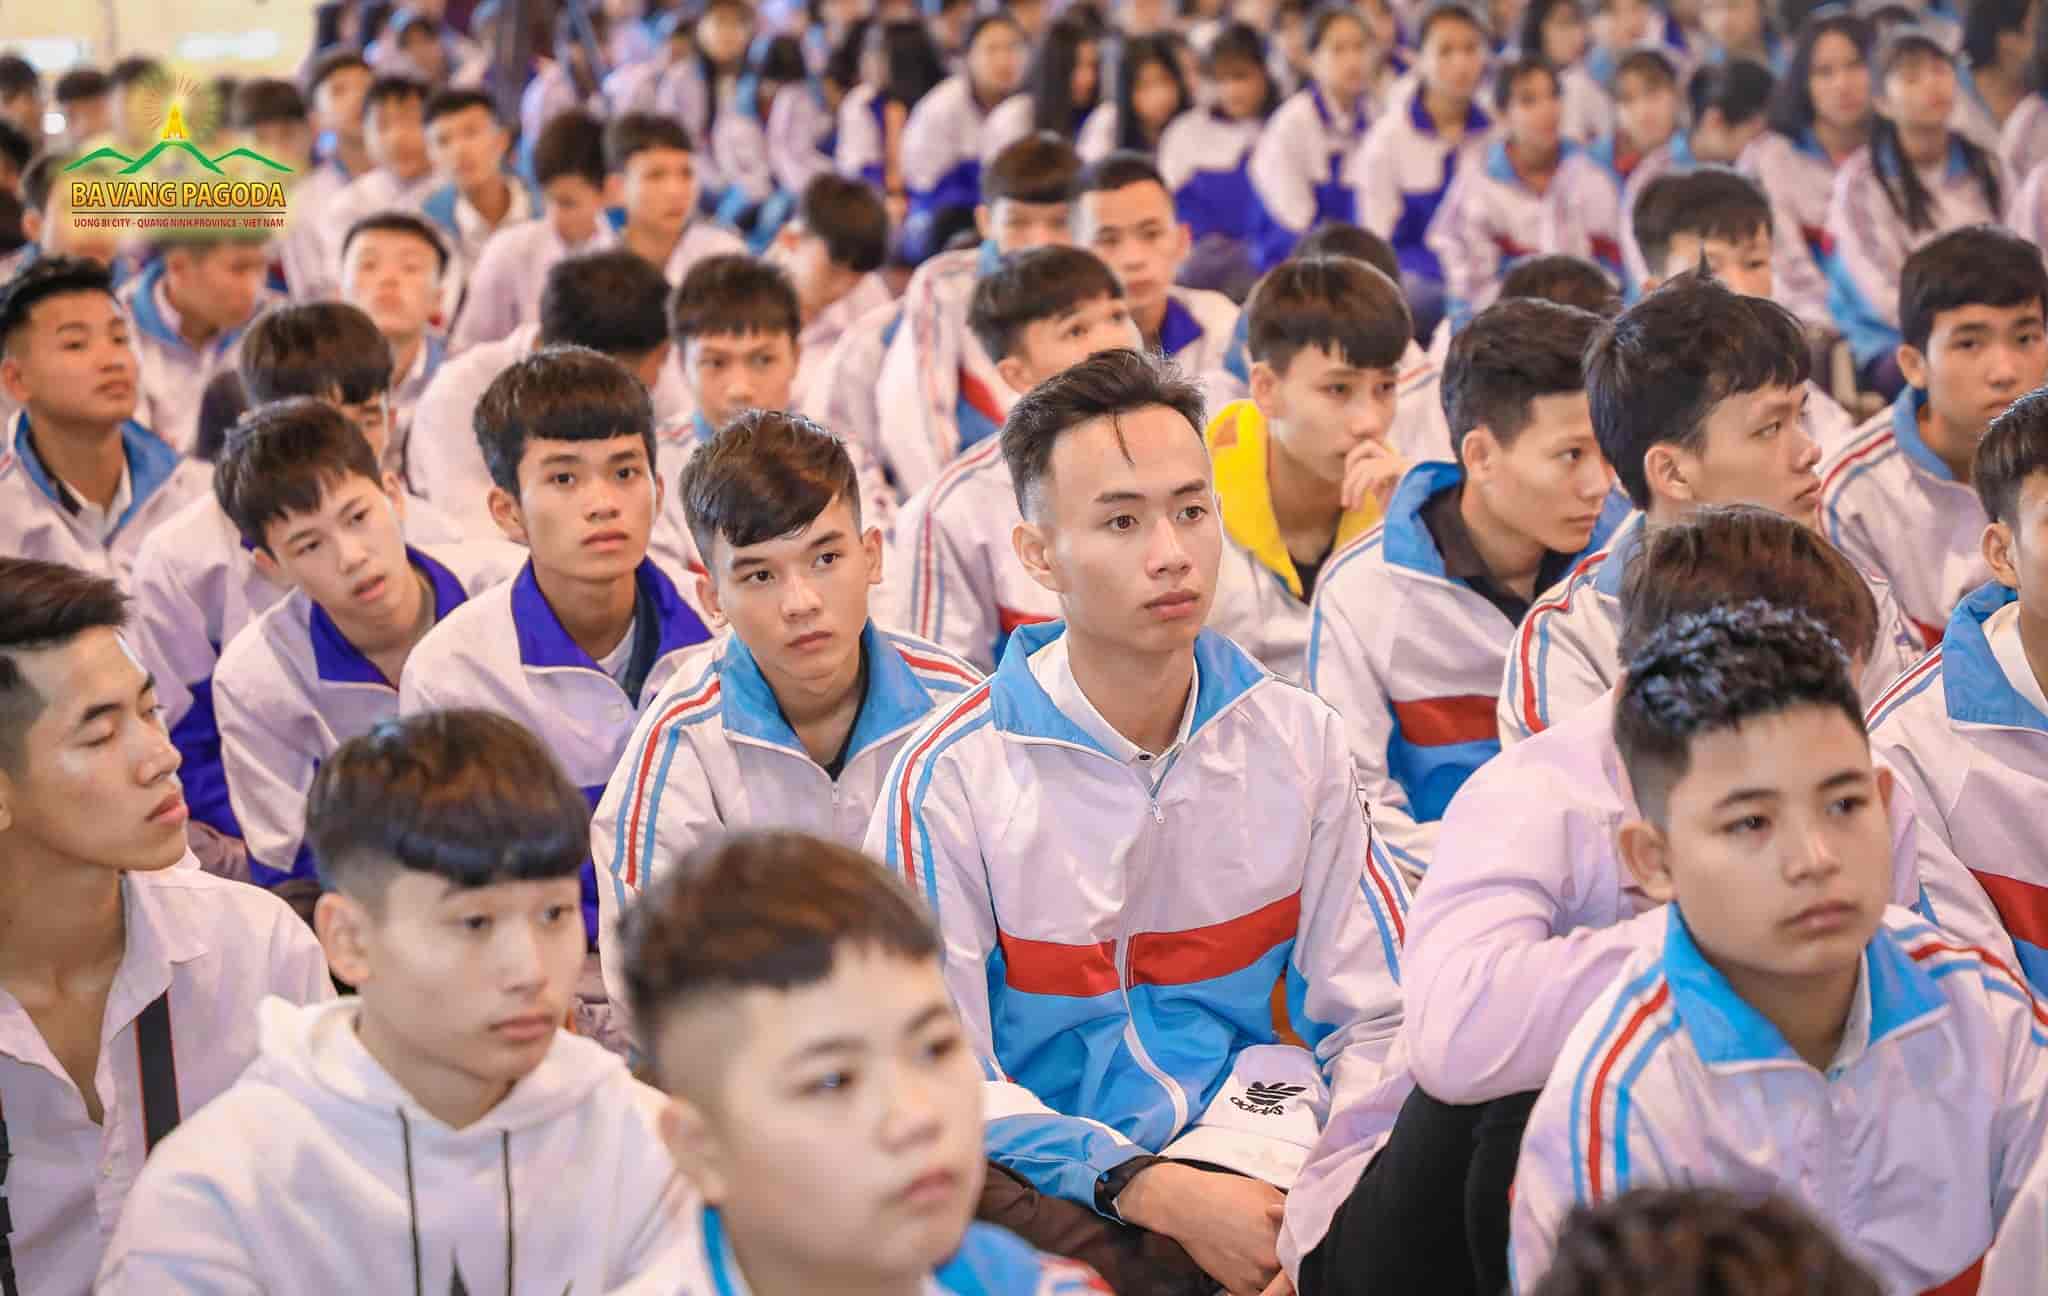 The students listening to the Dharma teachings preaced by Thay Thich Truc Thai Minh